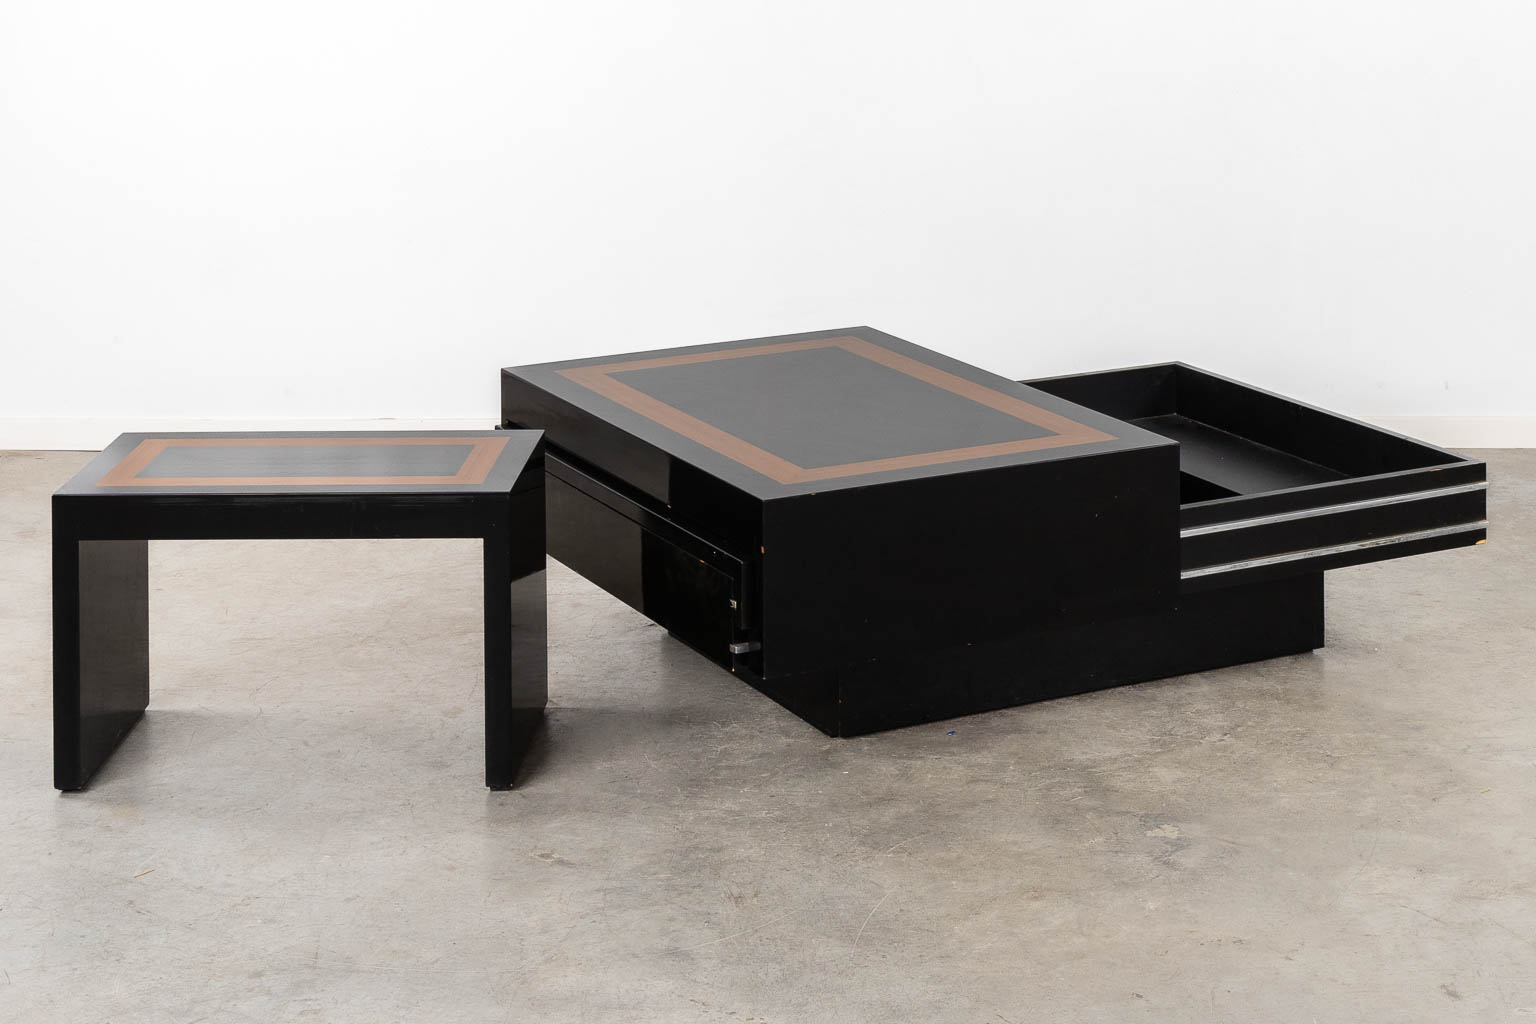 A slideable coffee table, added a bench. Lacquered wood. (L:110 x W:145 x H:47 cm)